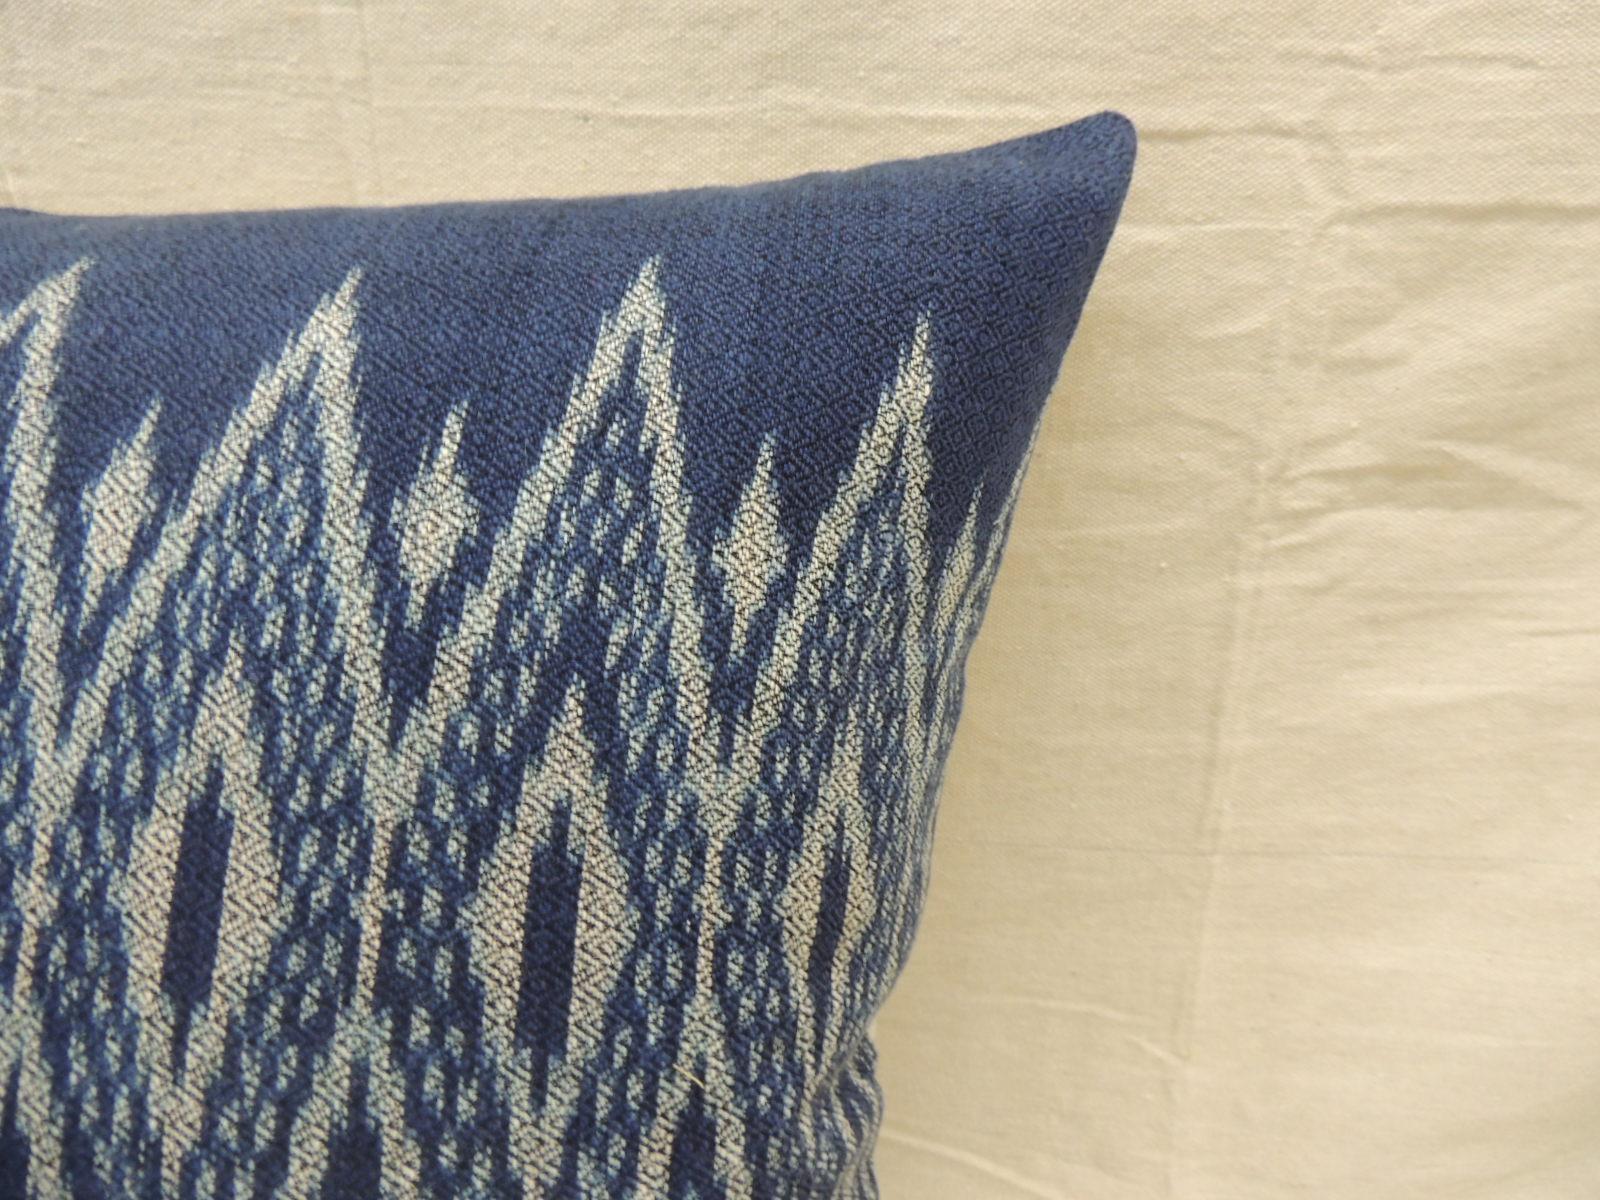 Indonesian Vintage Woven Blue and White Ikat Decorative Square Pillow